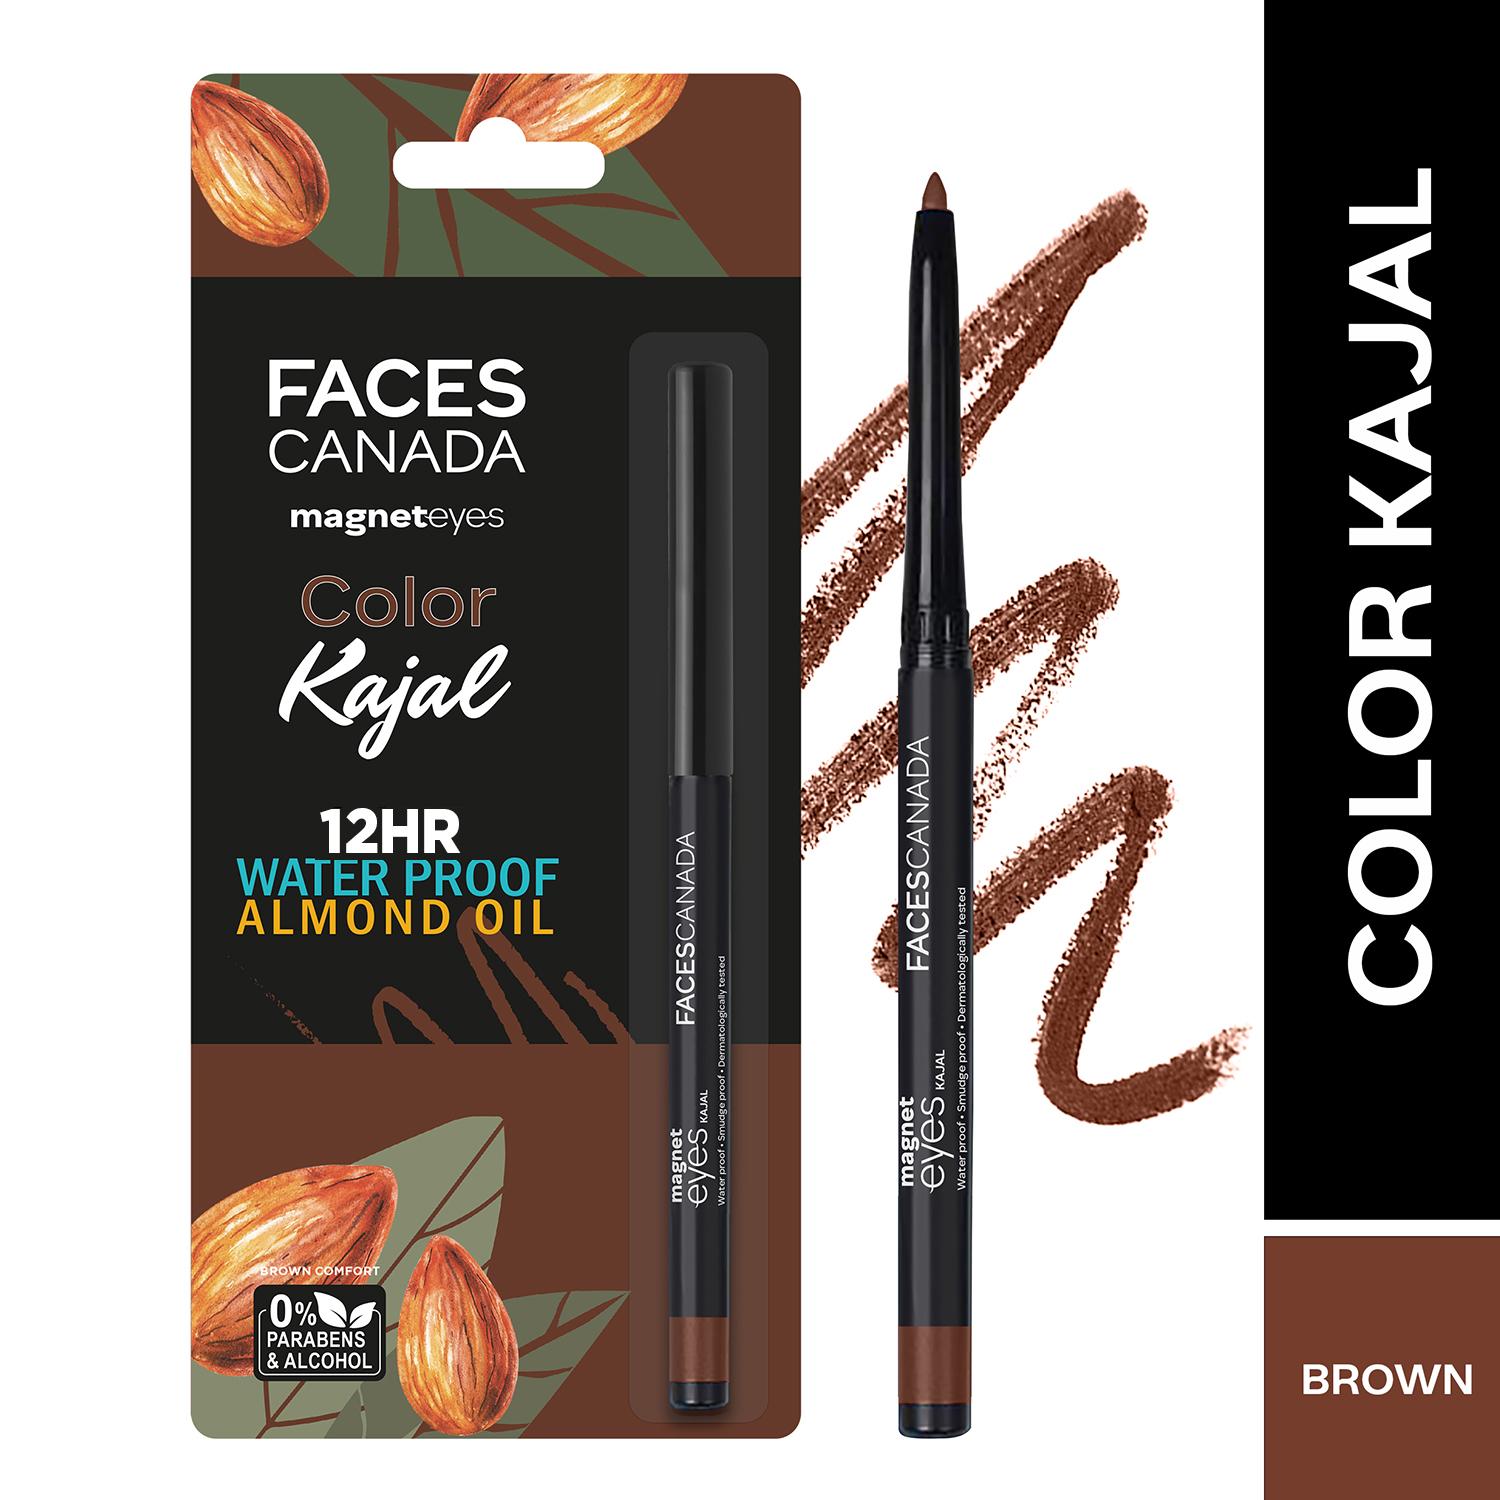 Faces Canada | Faces Canada Magneteyes Color Kajal - Brown Comfort 03, 12 HR Stay, Matte Finish, Water Proof (0.30 g)